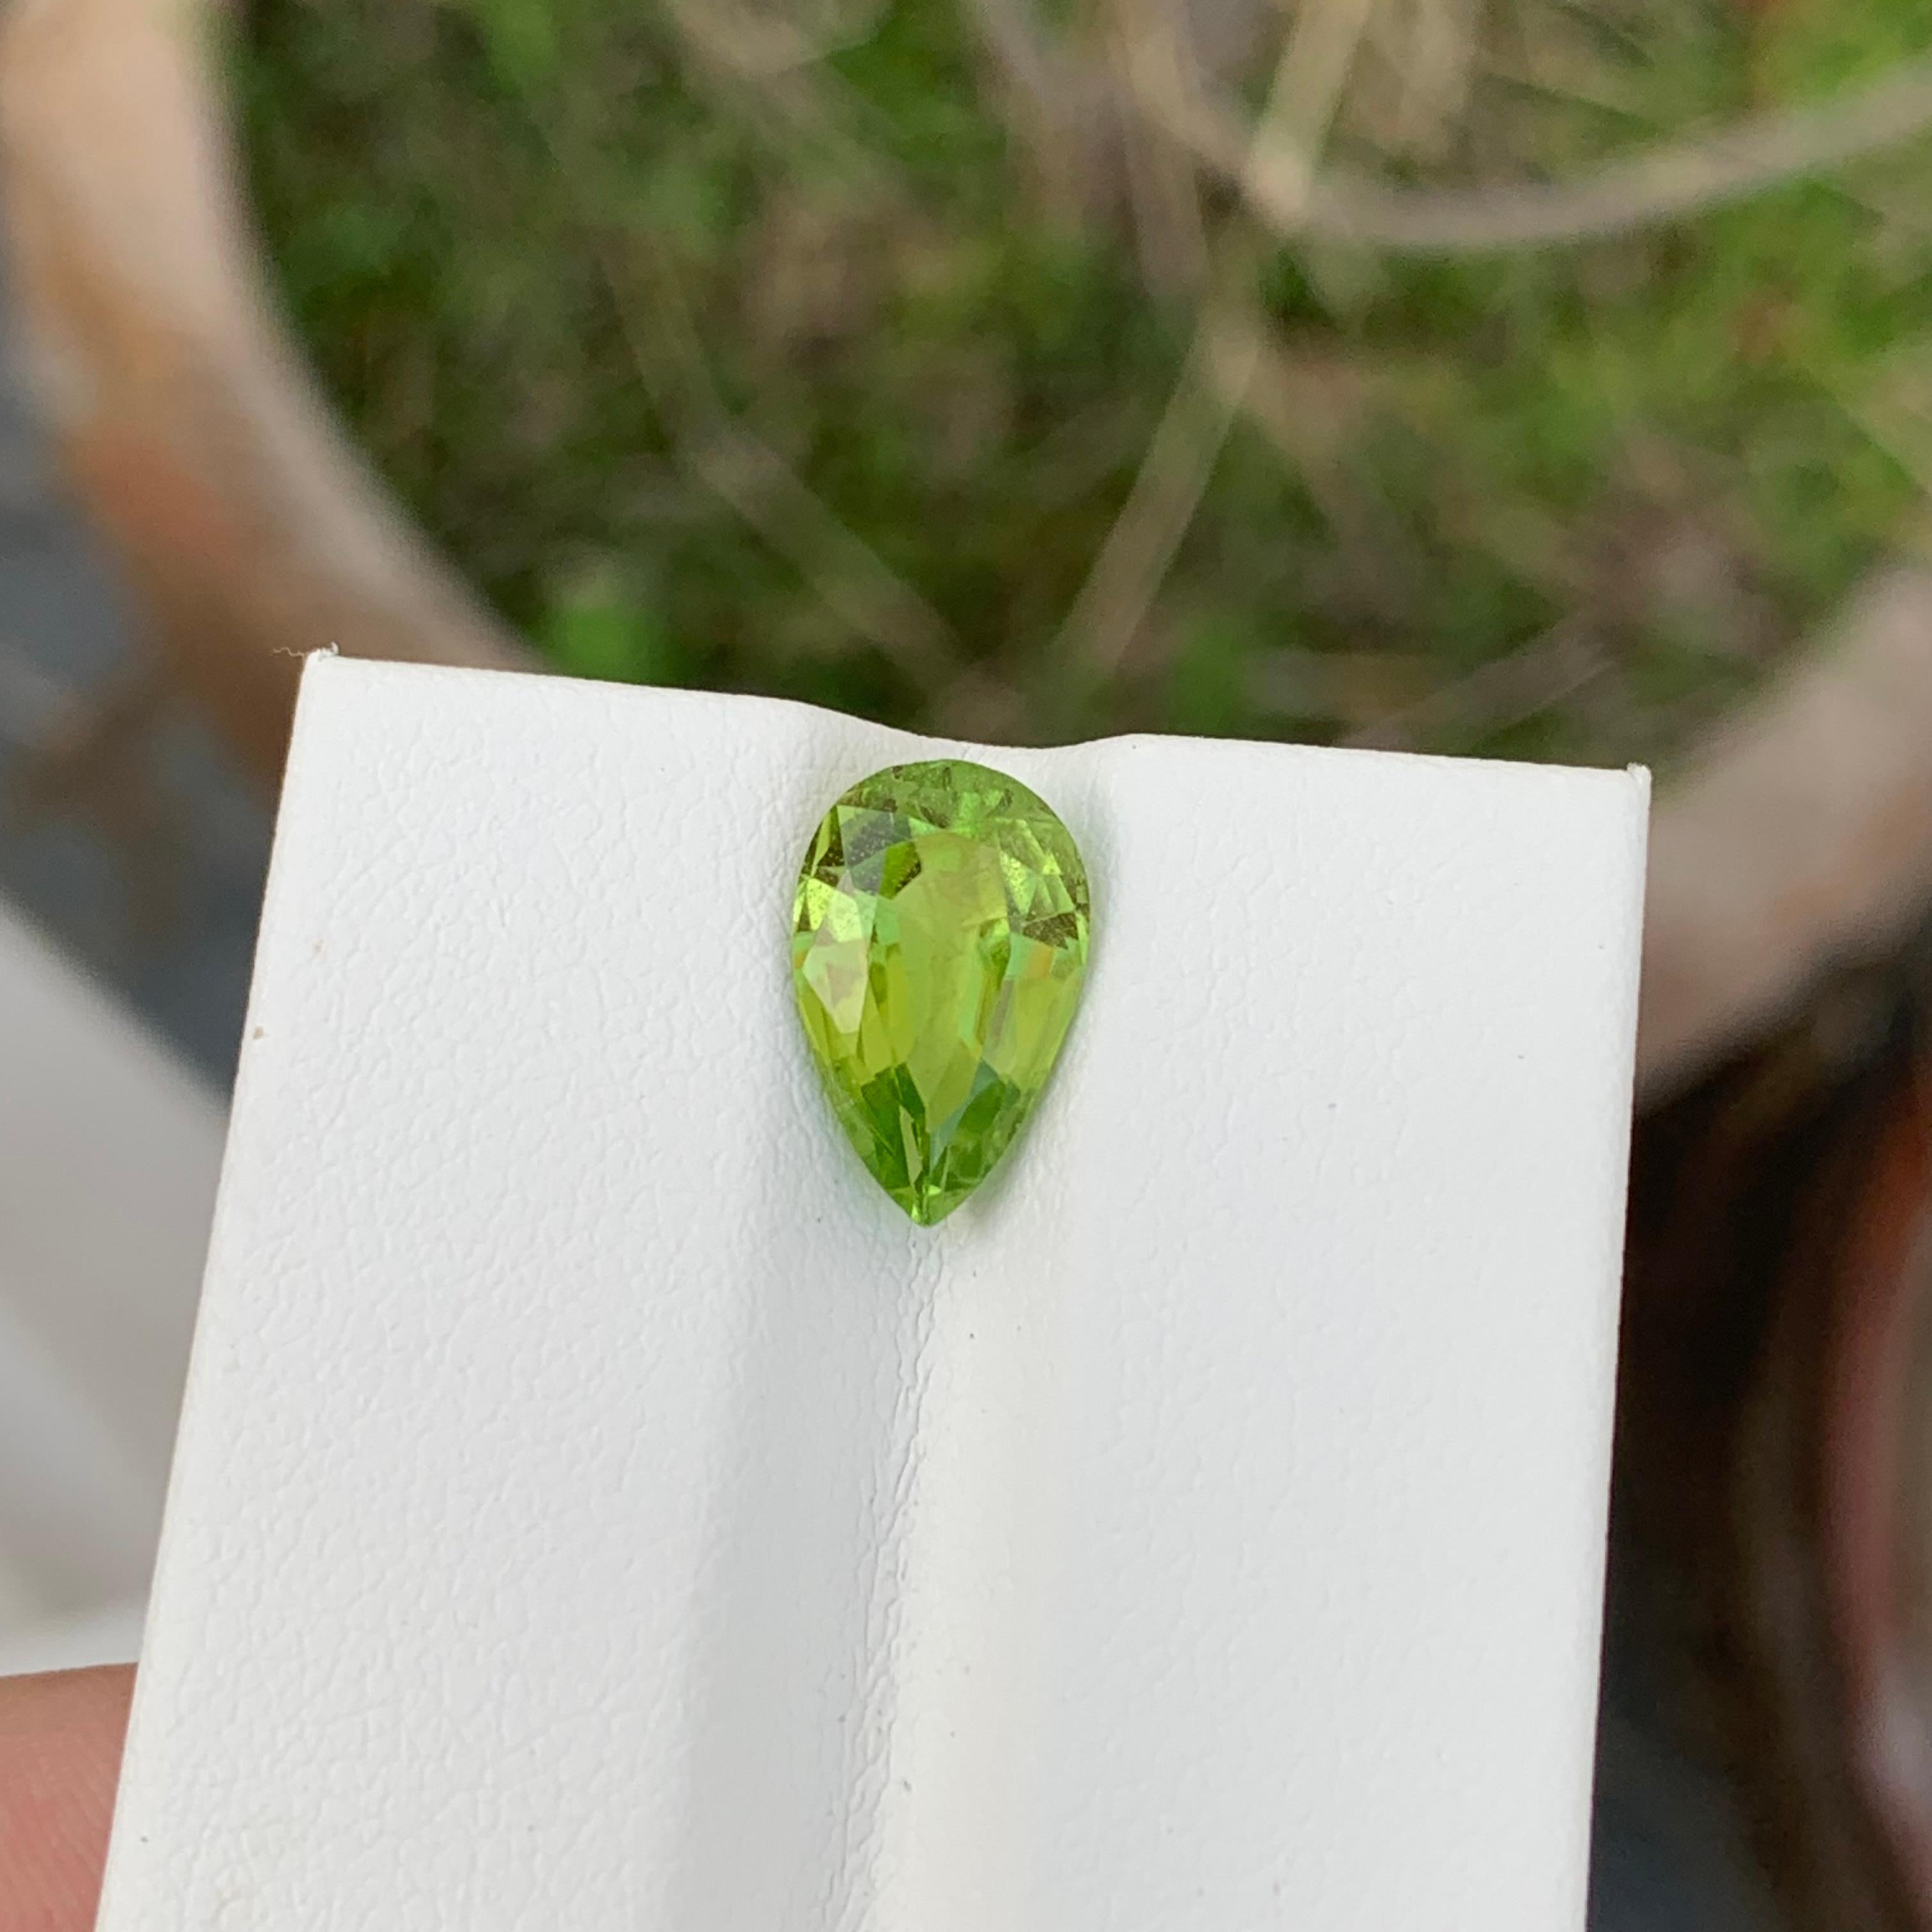 Loose Peridot
Weight: 2.55 Carats
Dimension: 11.5 x 7.3 x 4.7 Mm
Colour: Green
Origin: Supat Valley, Pakistan
Shape: Pear Shape 
Certificate: On Demand
Treatment: Non

Peridot, a vibrant and lustrous gemstone, has been cherished for centuries for